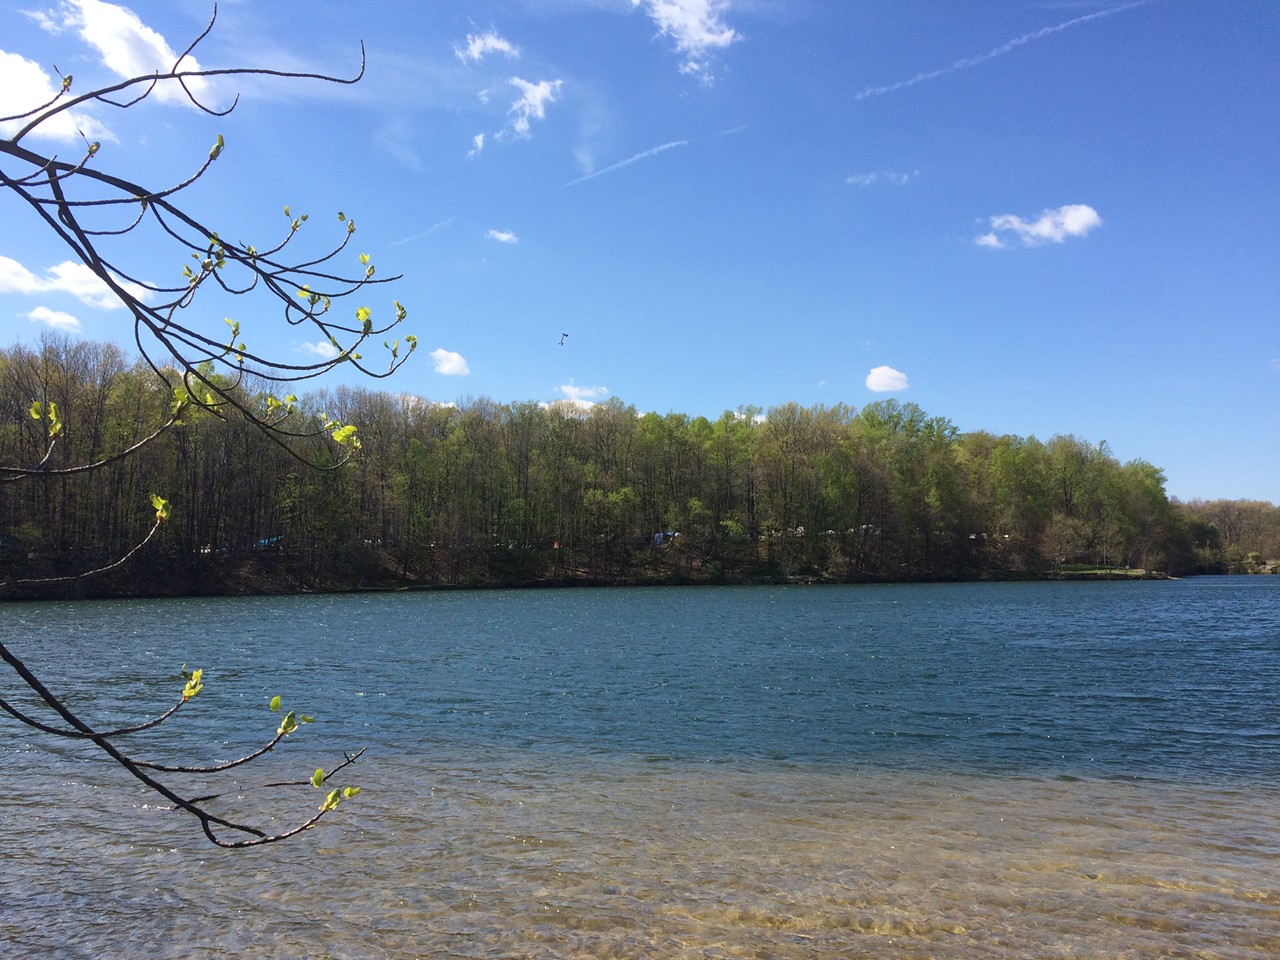 Thanks to fine weather, the quarry was beautiful and serene all weekend. On the beach, people gathered for yoga workshops and group meditation.